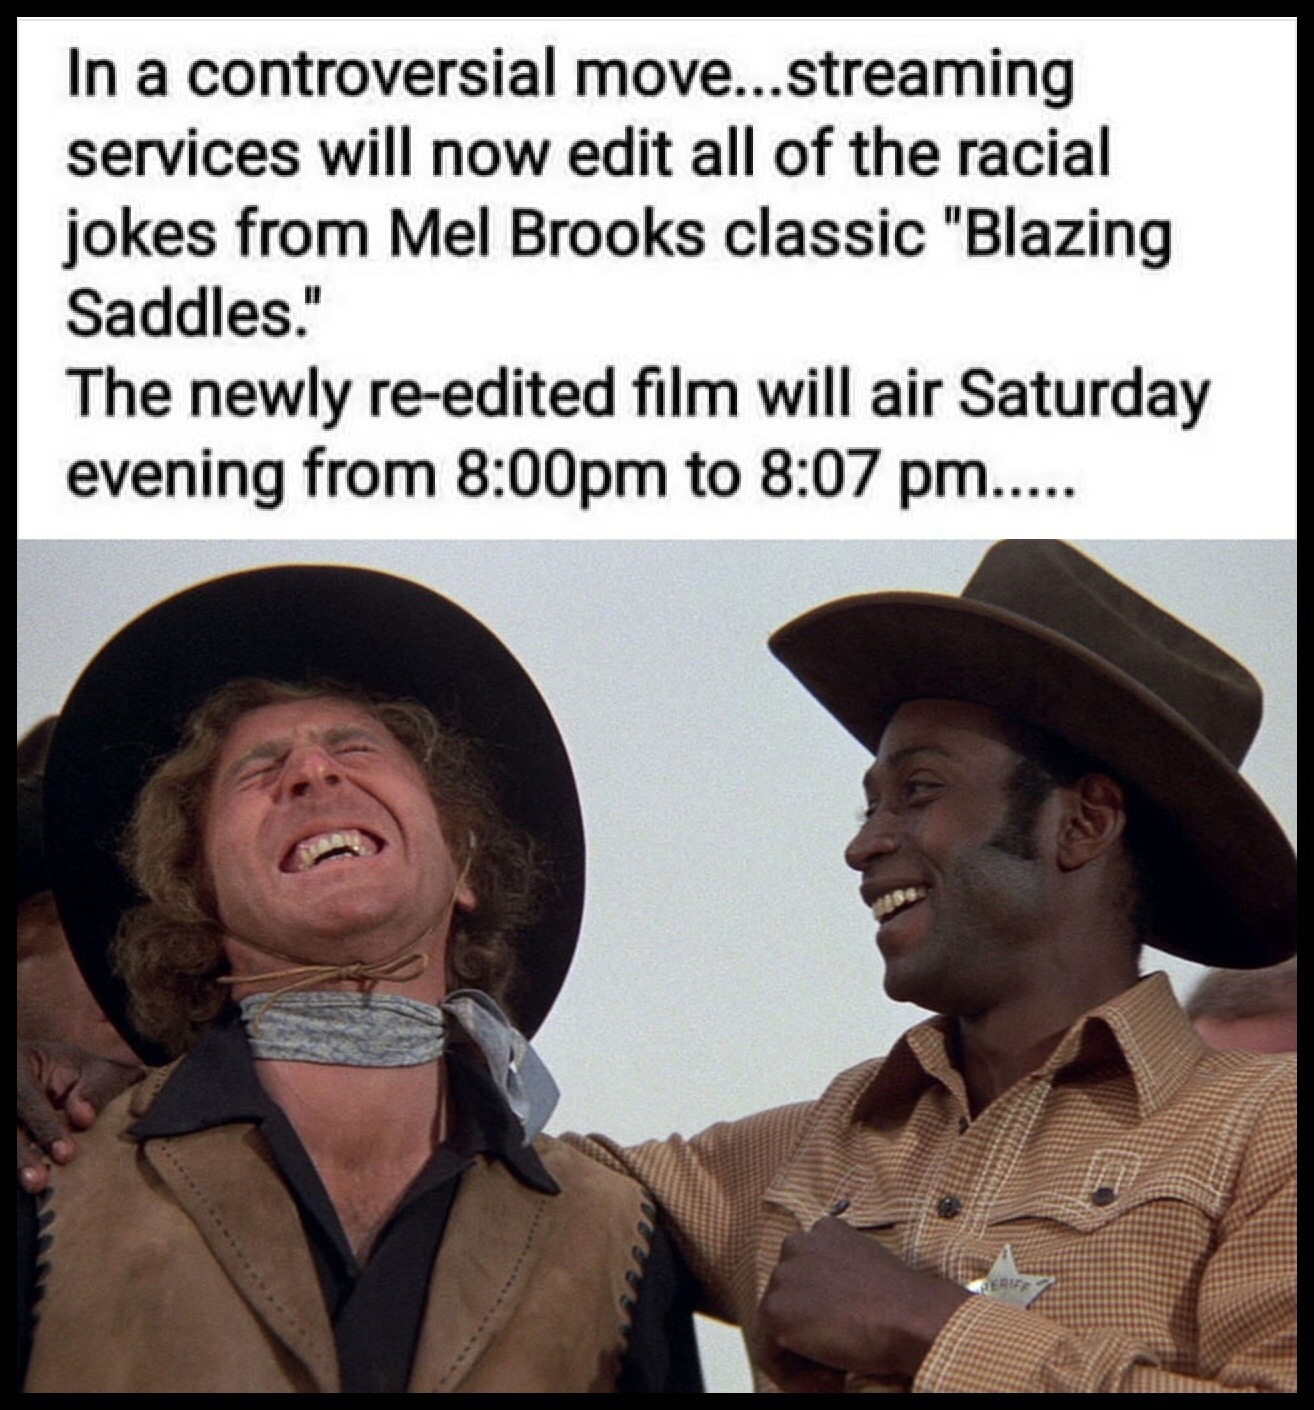 blazing saddles - In a controversial move...streaming services will now edit all of the racial jokes from Mel Brooks classic "Blazing Saddles." The newly reedited film will air Saturday evening from pm to ..... Serie